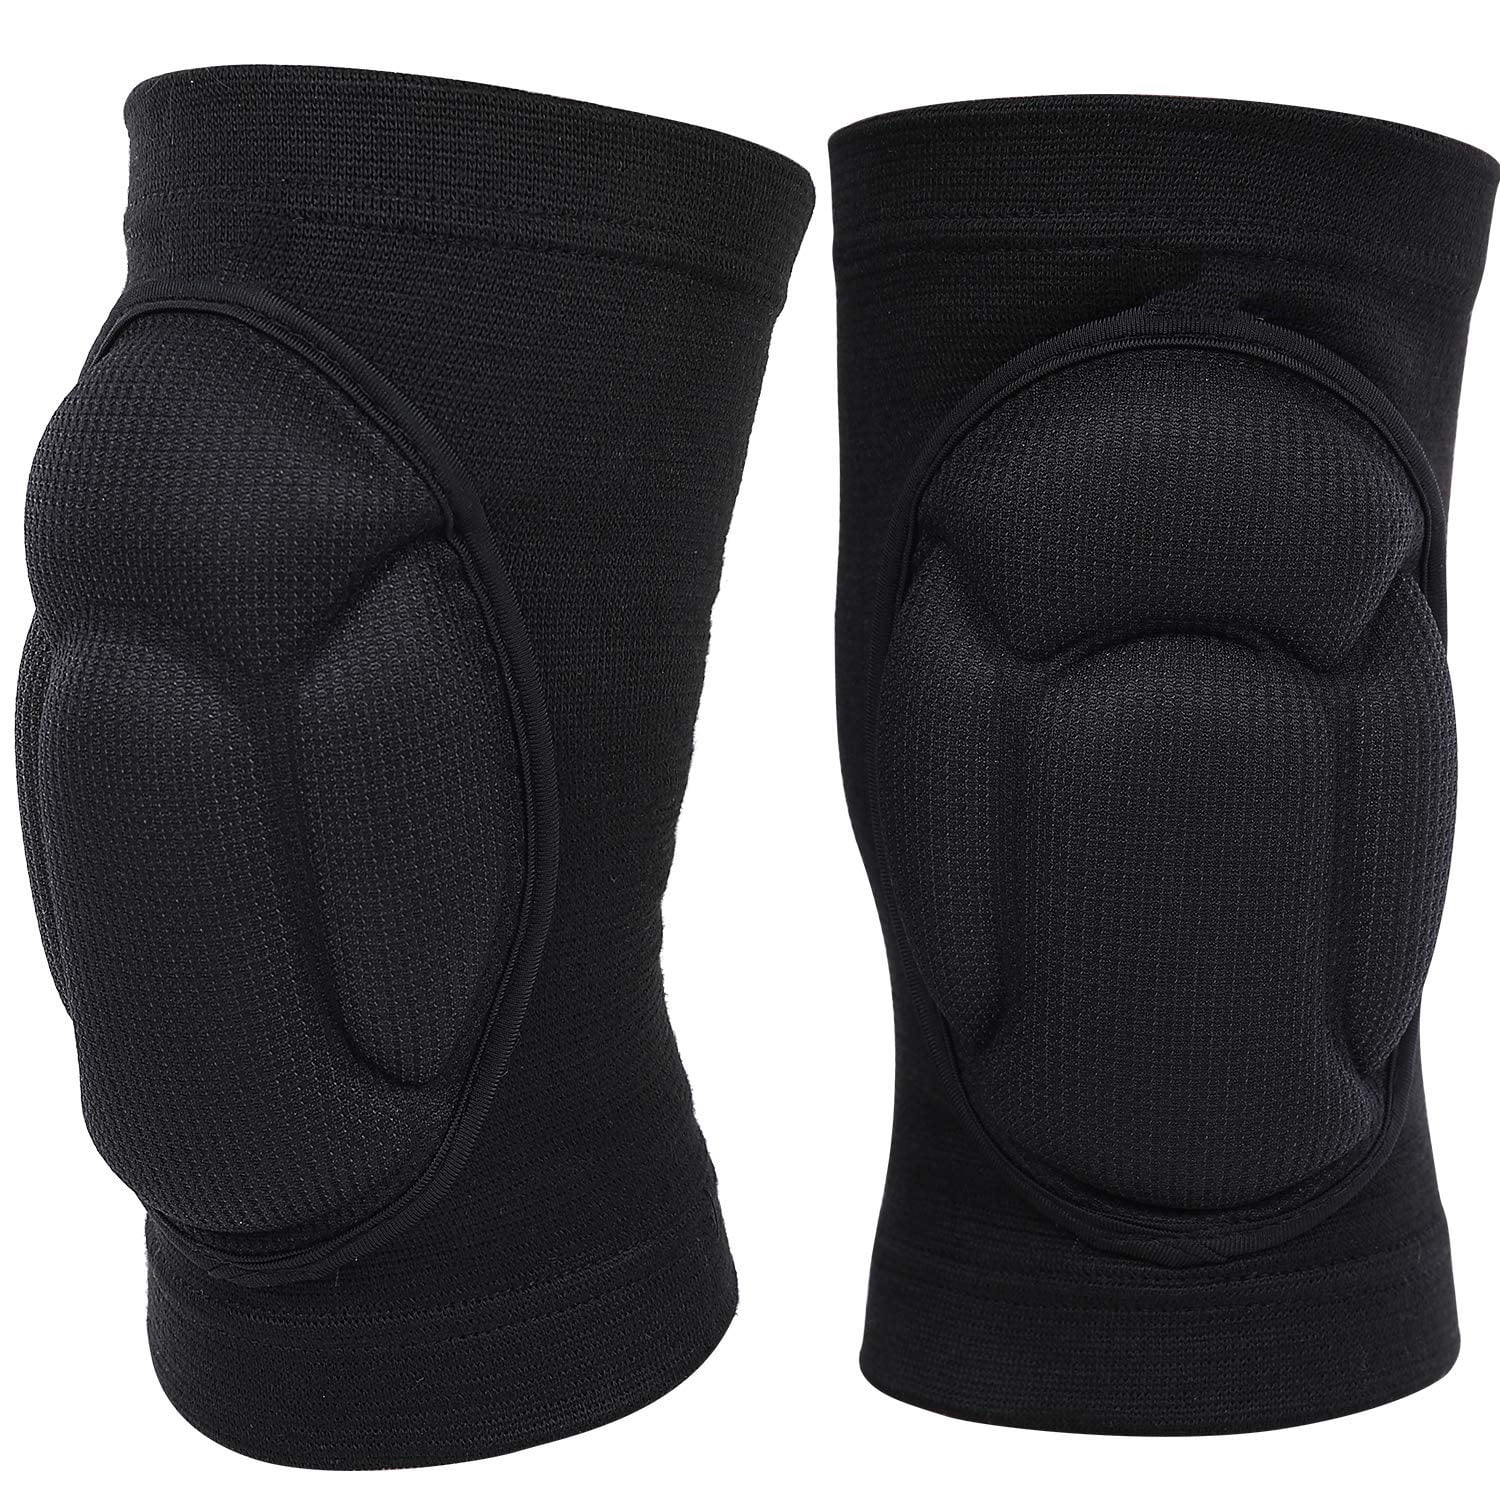 Soft Breathable Sponge Anti-Slip Volleyball Pads Black, with Sports Fashion Wristband & Storage Pouch 4PCS Volleyball Knee Pads Collision Avoidance Professional Knee Sleeve for Sports Work Daily